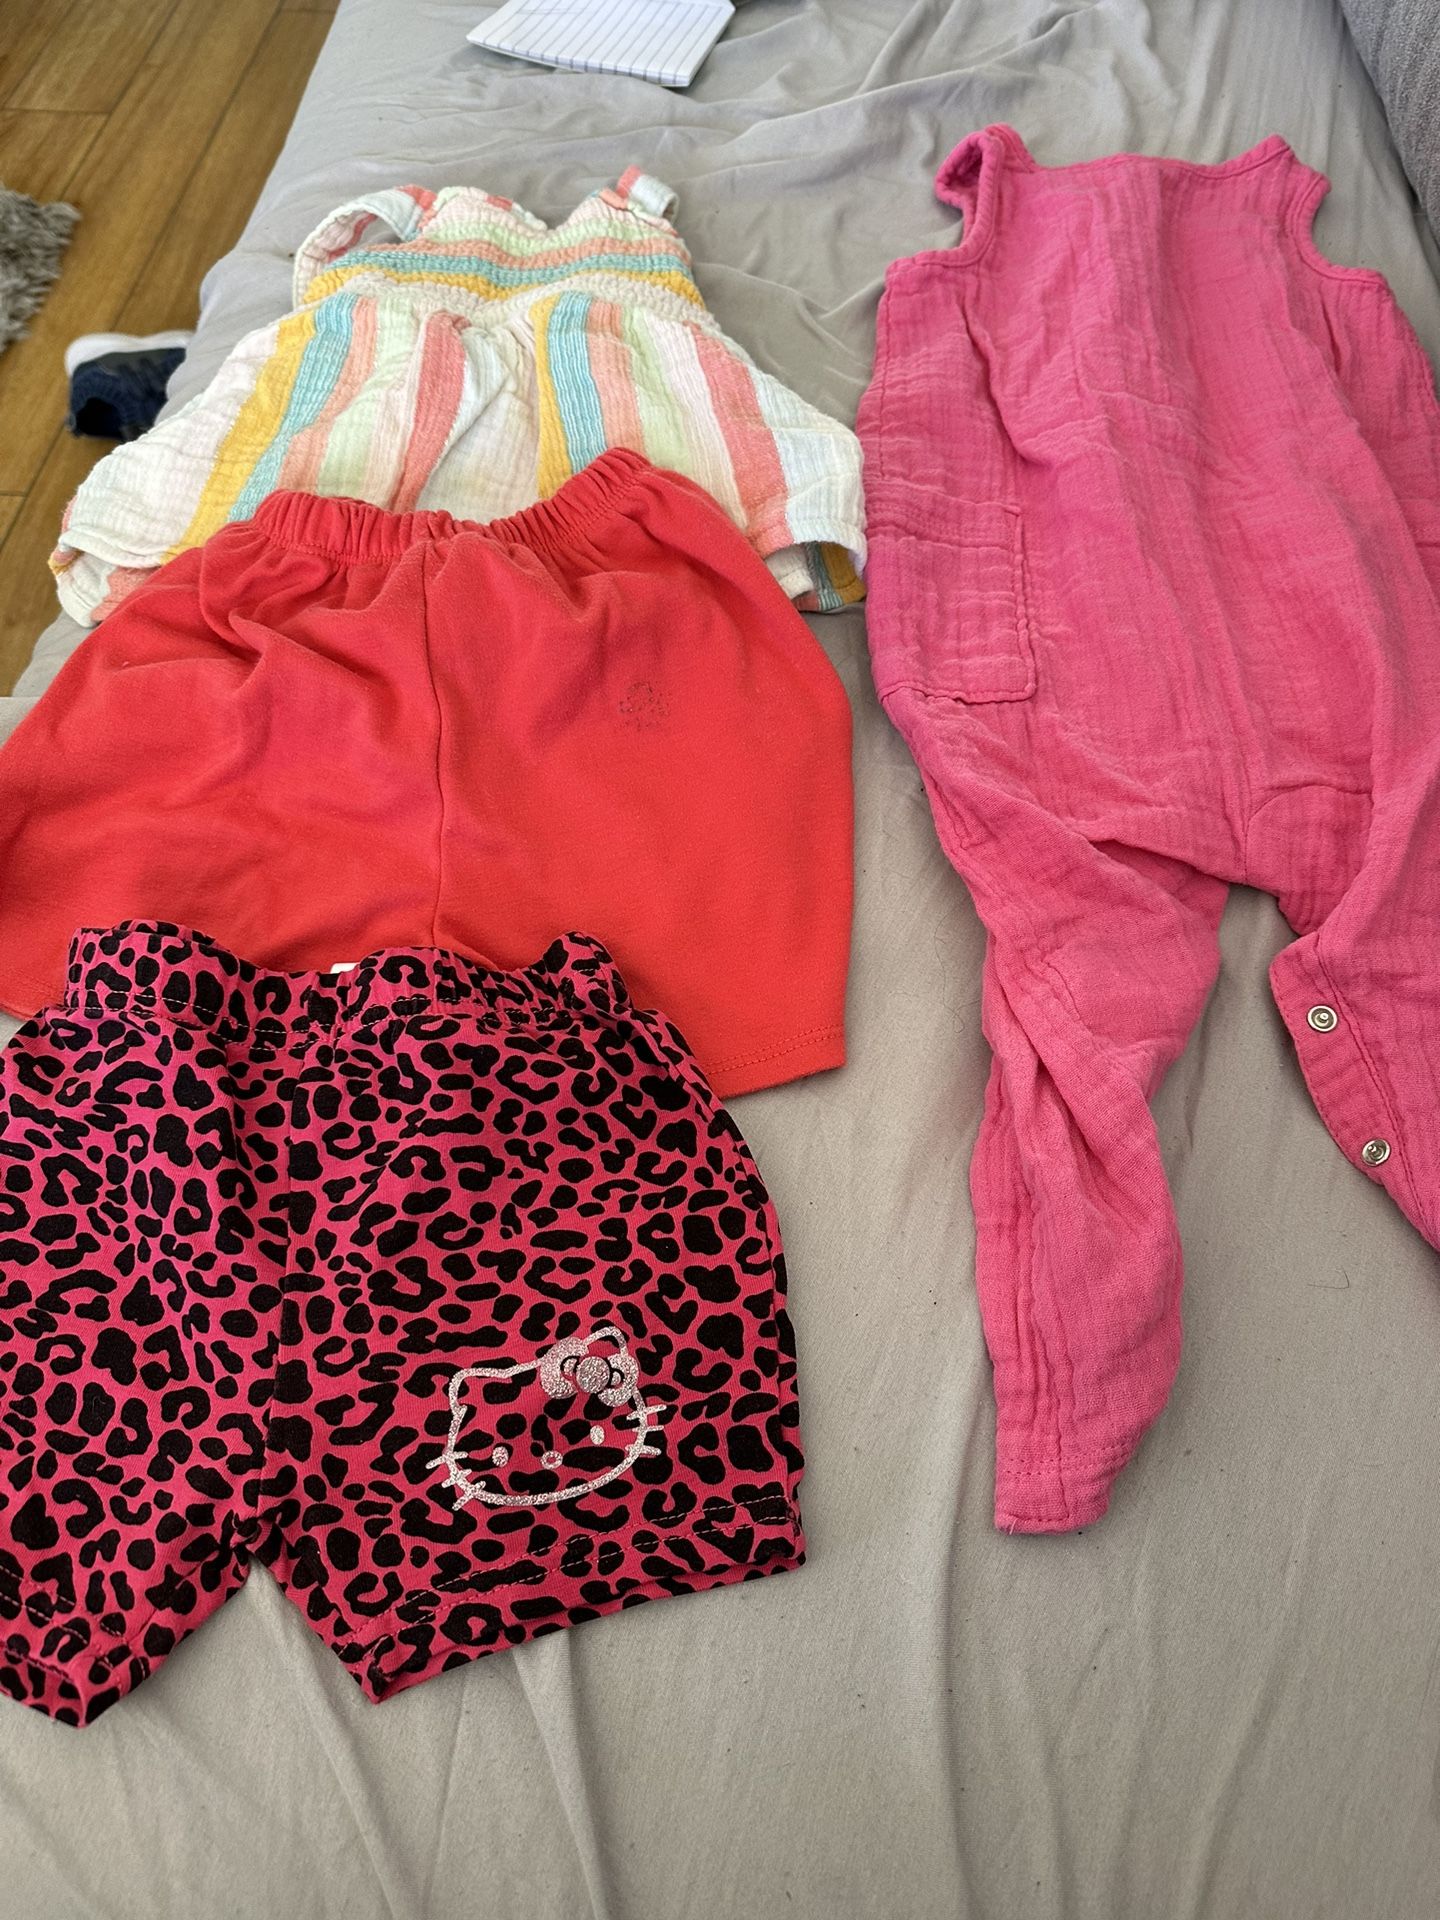 Toddler Clothes Size 2 